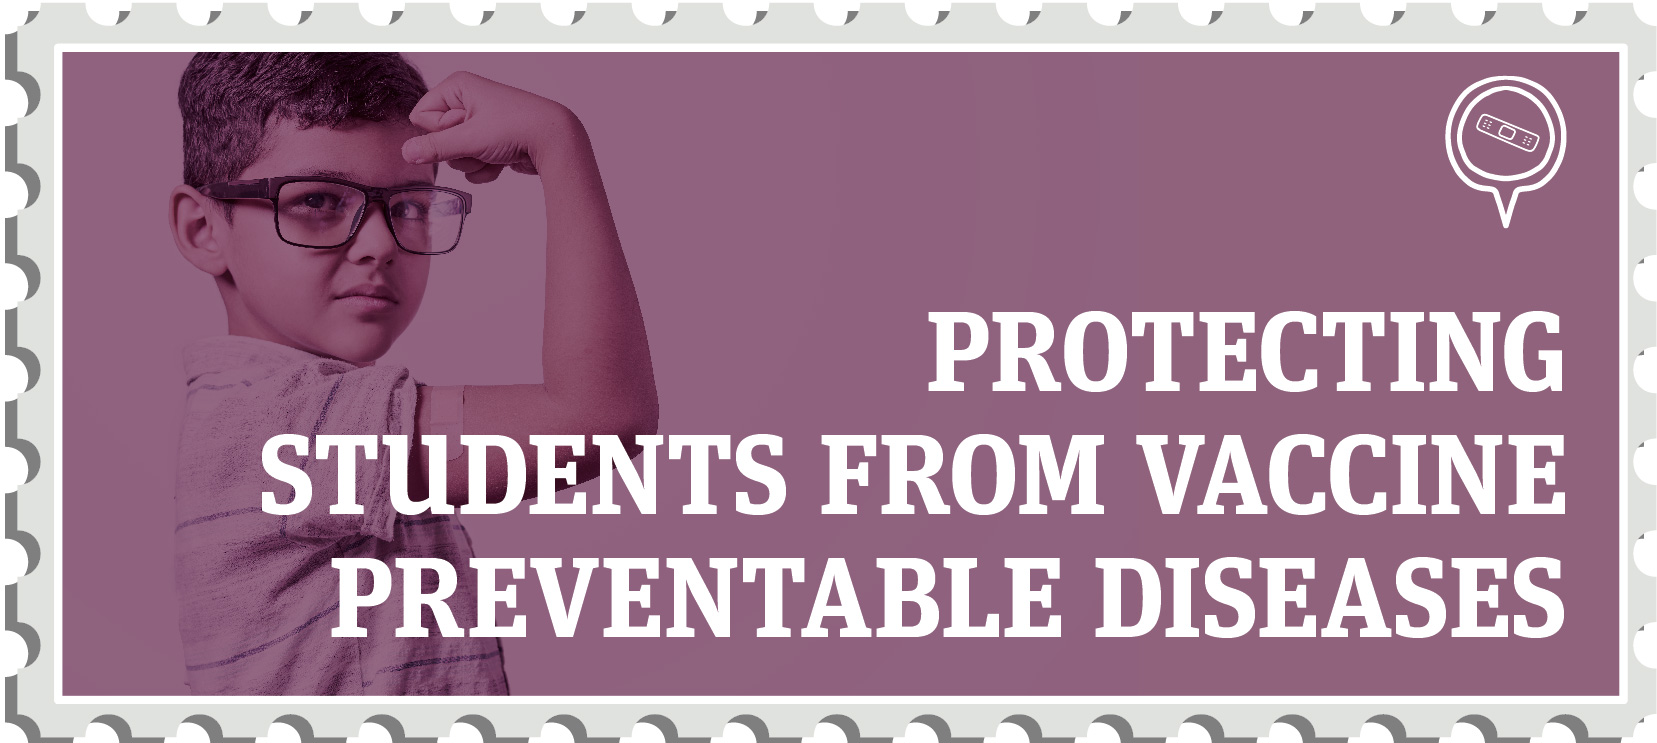 Protecting students from vaccine preventable diseases